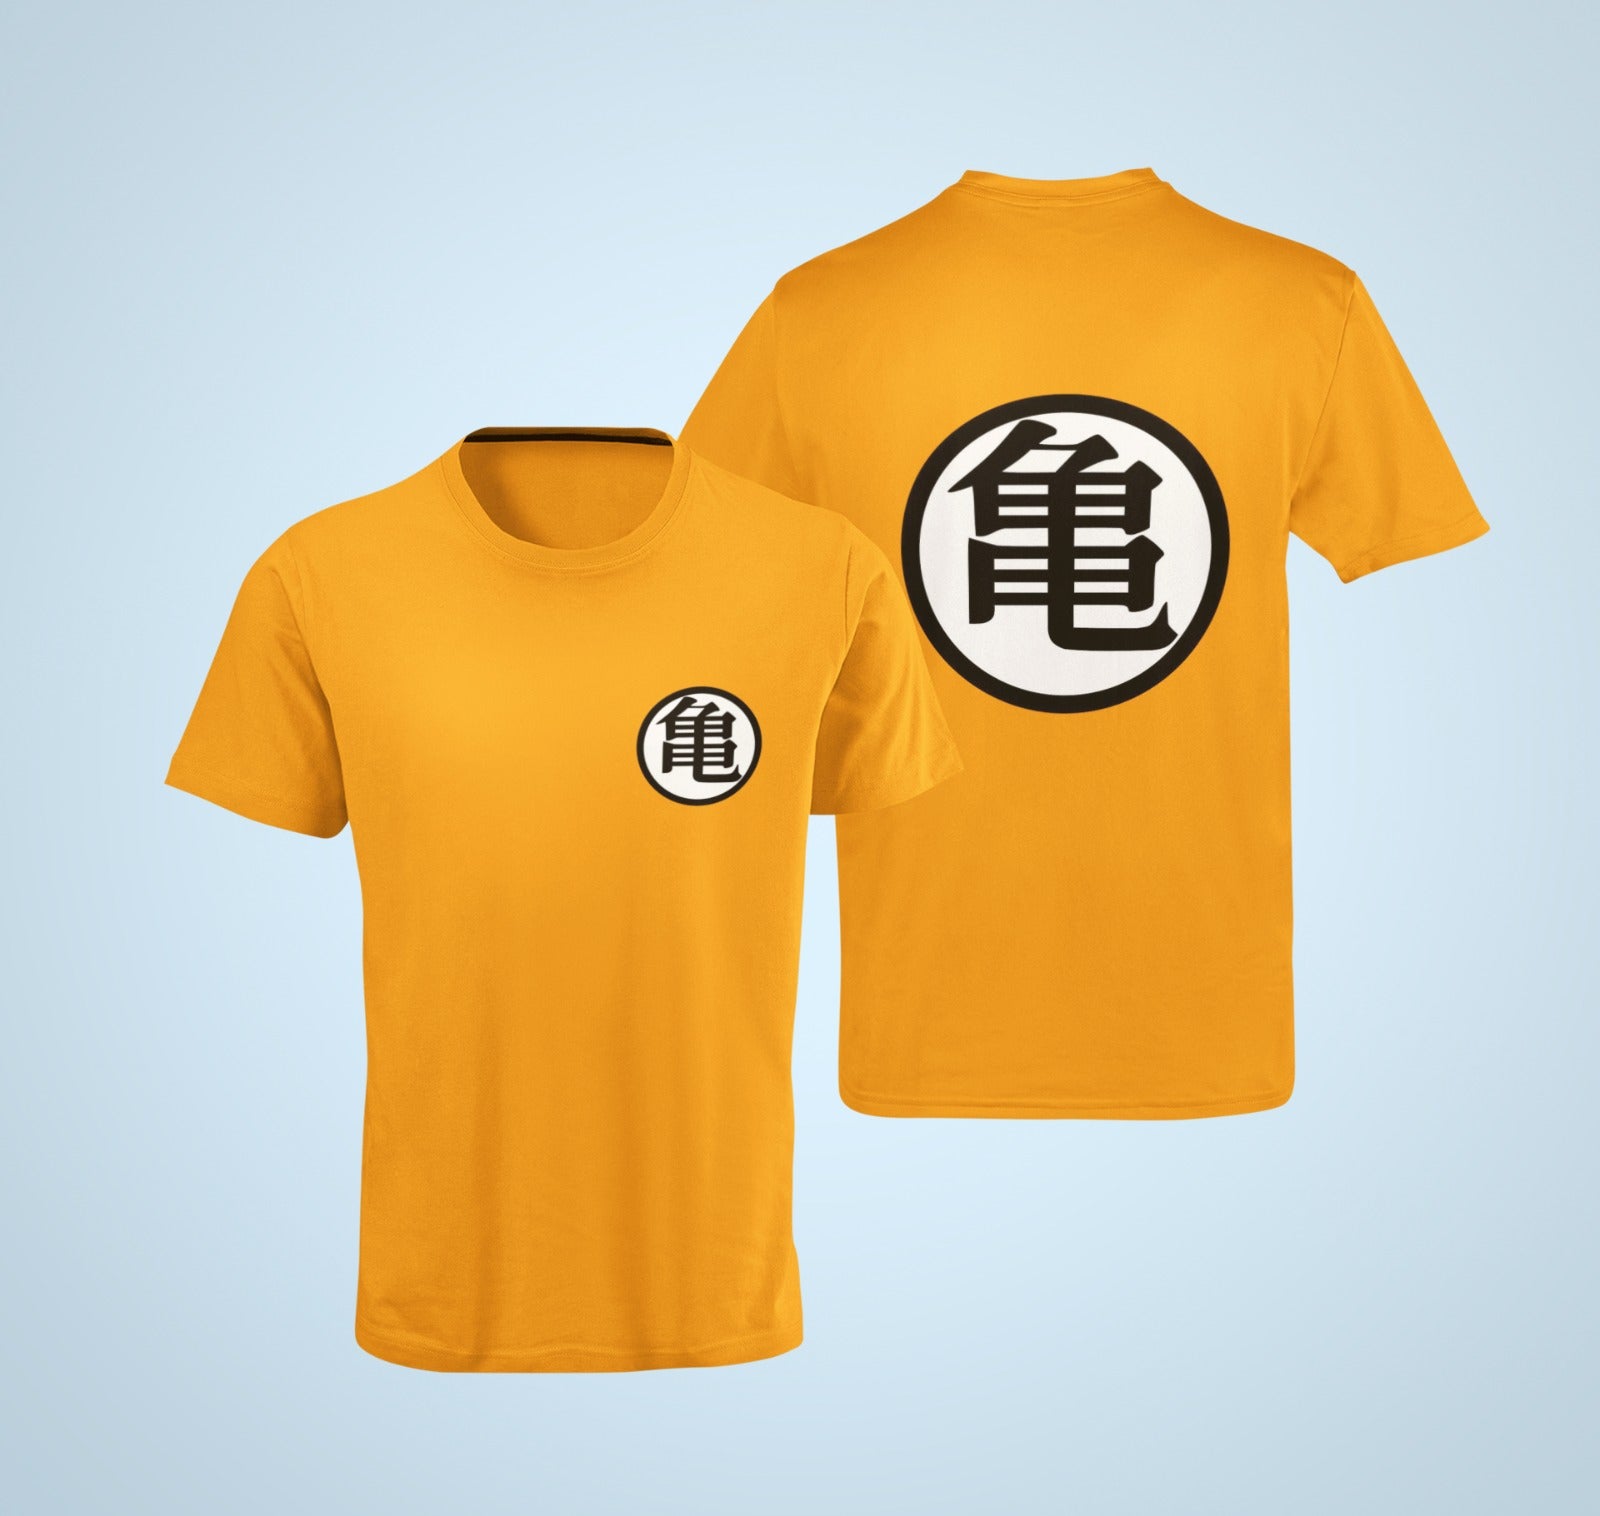 Get a unique and stylish look with our orange t-shirt featuring "turtle" in Japanese, inspired by the iconic Dragon Ball style. Made with high-quality materials, this comfortable and durable t-shirt is perfect for anime fans or anyone looking to add some Japanese flair to their wardrobe. Order now and stand out from the crowd!